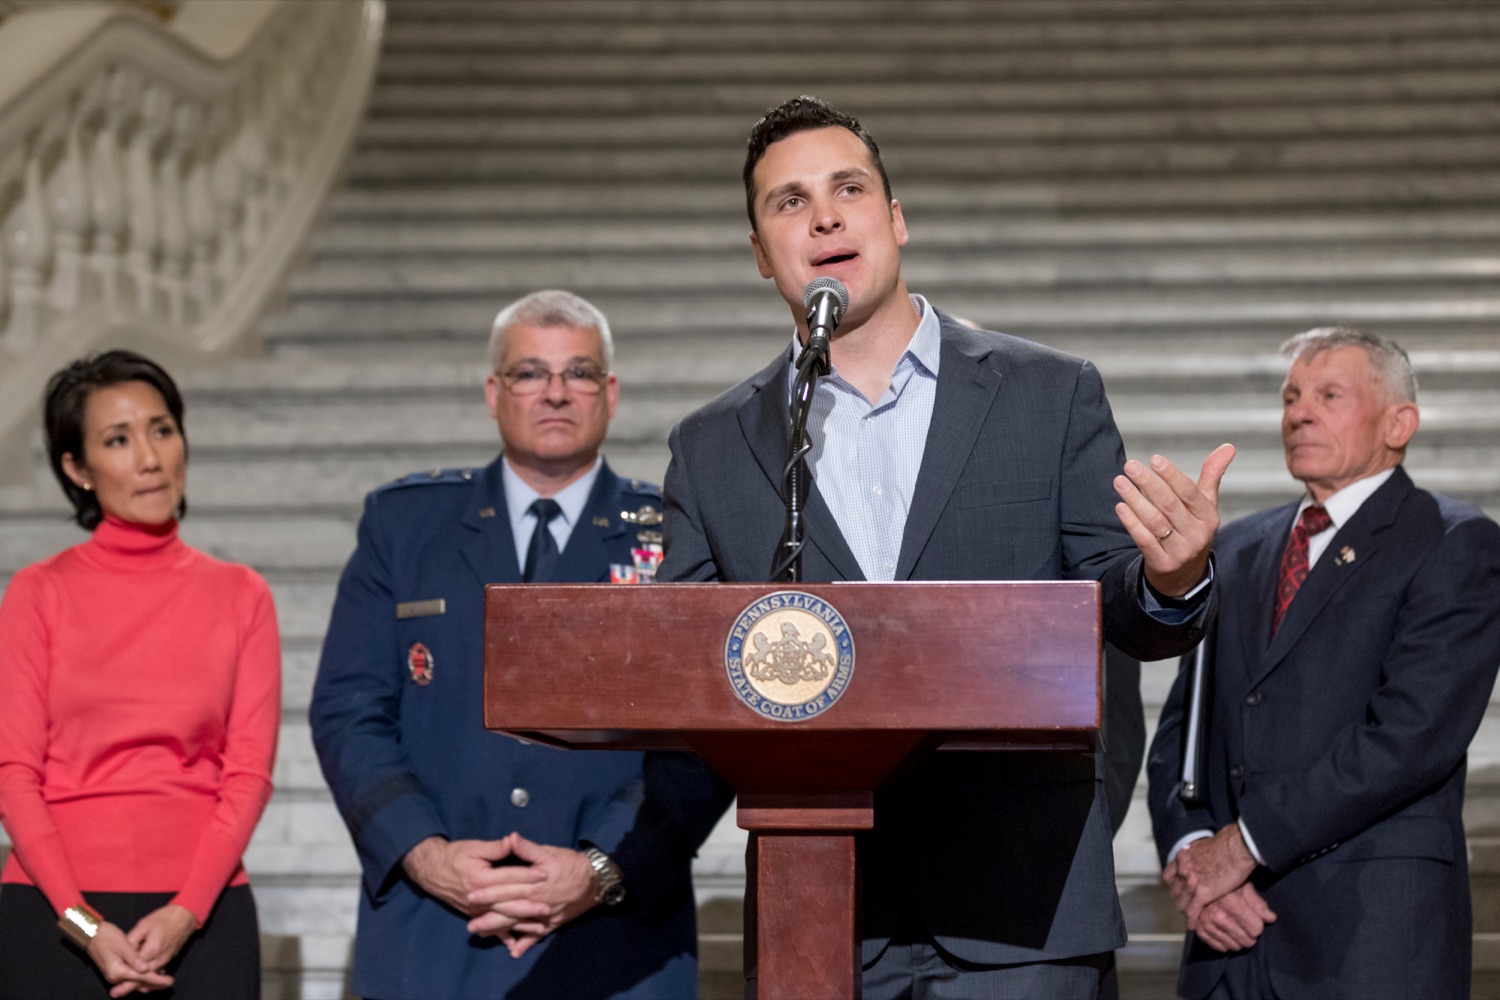 State Rep. Andrew Lewis speaks during a press conference outlining how competition for qualified individuals among all employment sectors affects military recruiting efforts and warrants greater investment in our next generation inside the Capitol Rotunda on Tuesday, November 12, 2019.<br><a href="https://filesource.amperwave.net/commonwealthofpa/photo/17588_GOV_Mission_Readiness_NK_017.JPG" target="_blank">⇣ Download Photo</a>